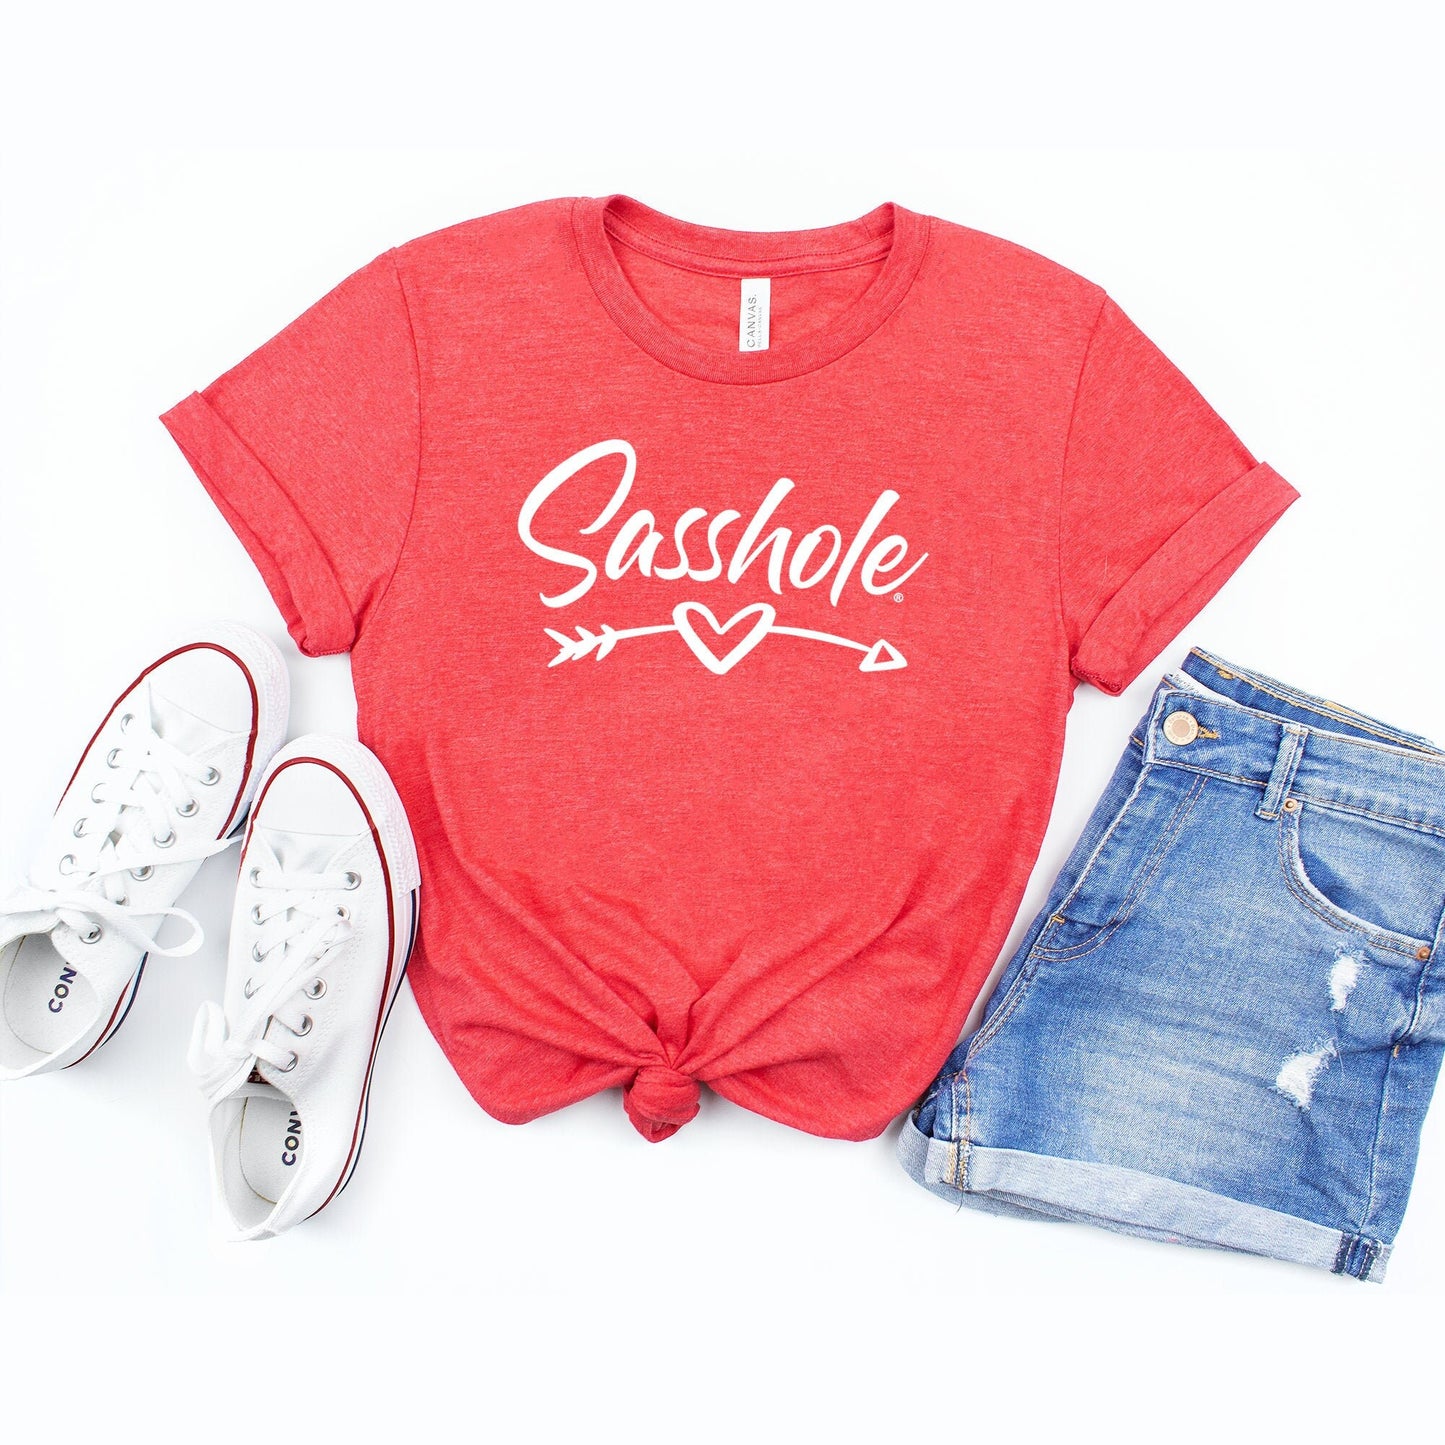 Sassy, Bold, and Unapologetic: Our Women's Sasshole® T-Shirt